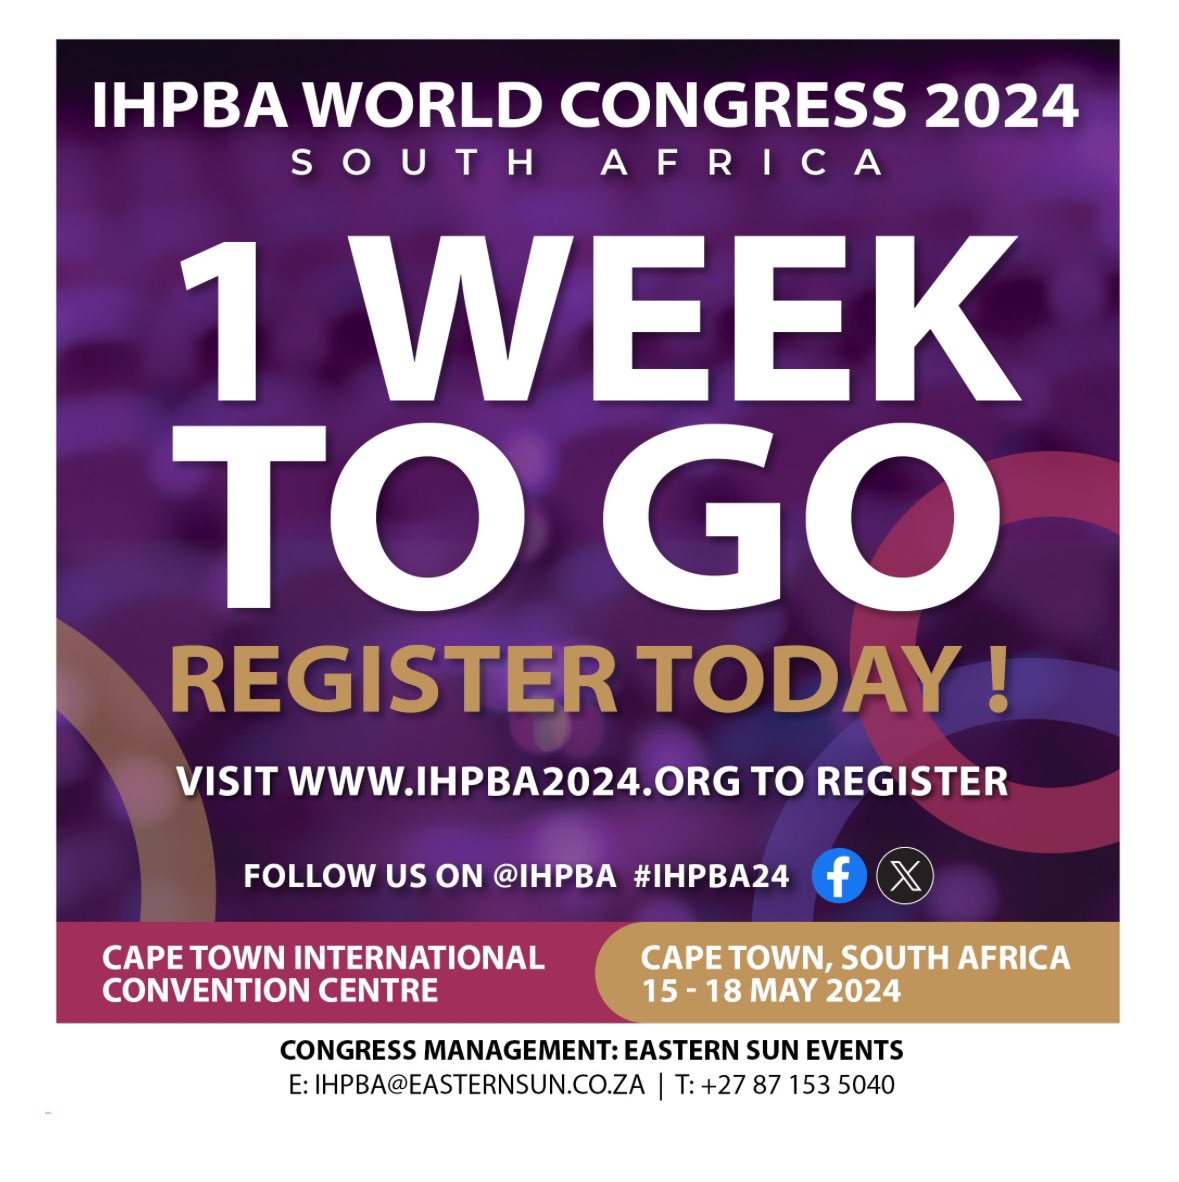 Excited for the @IHPBA meeting in Cape Town next week. Looking forward meeting up with old and new friends & colleagues from around the 🌍. Hope to see you many of you there. @EAHPBA @GBIHPBAnews @hpb_so #SoMe4Surgery